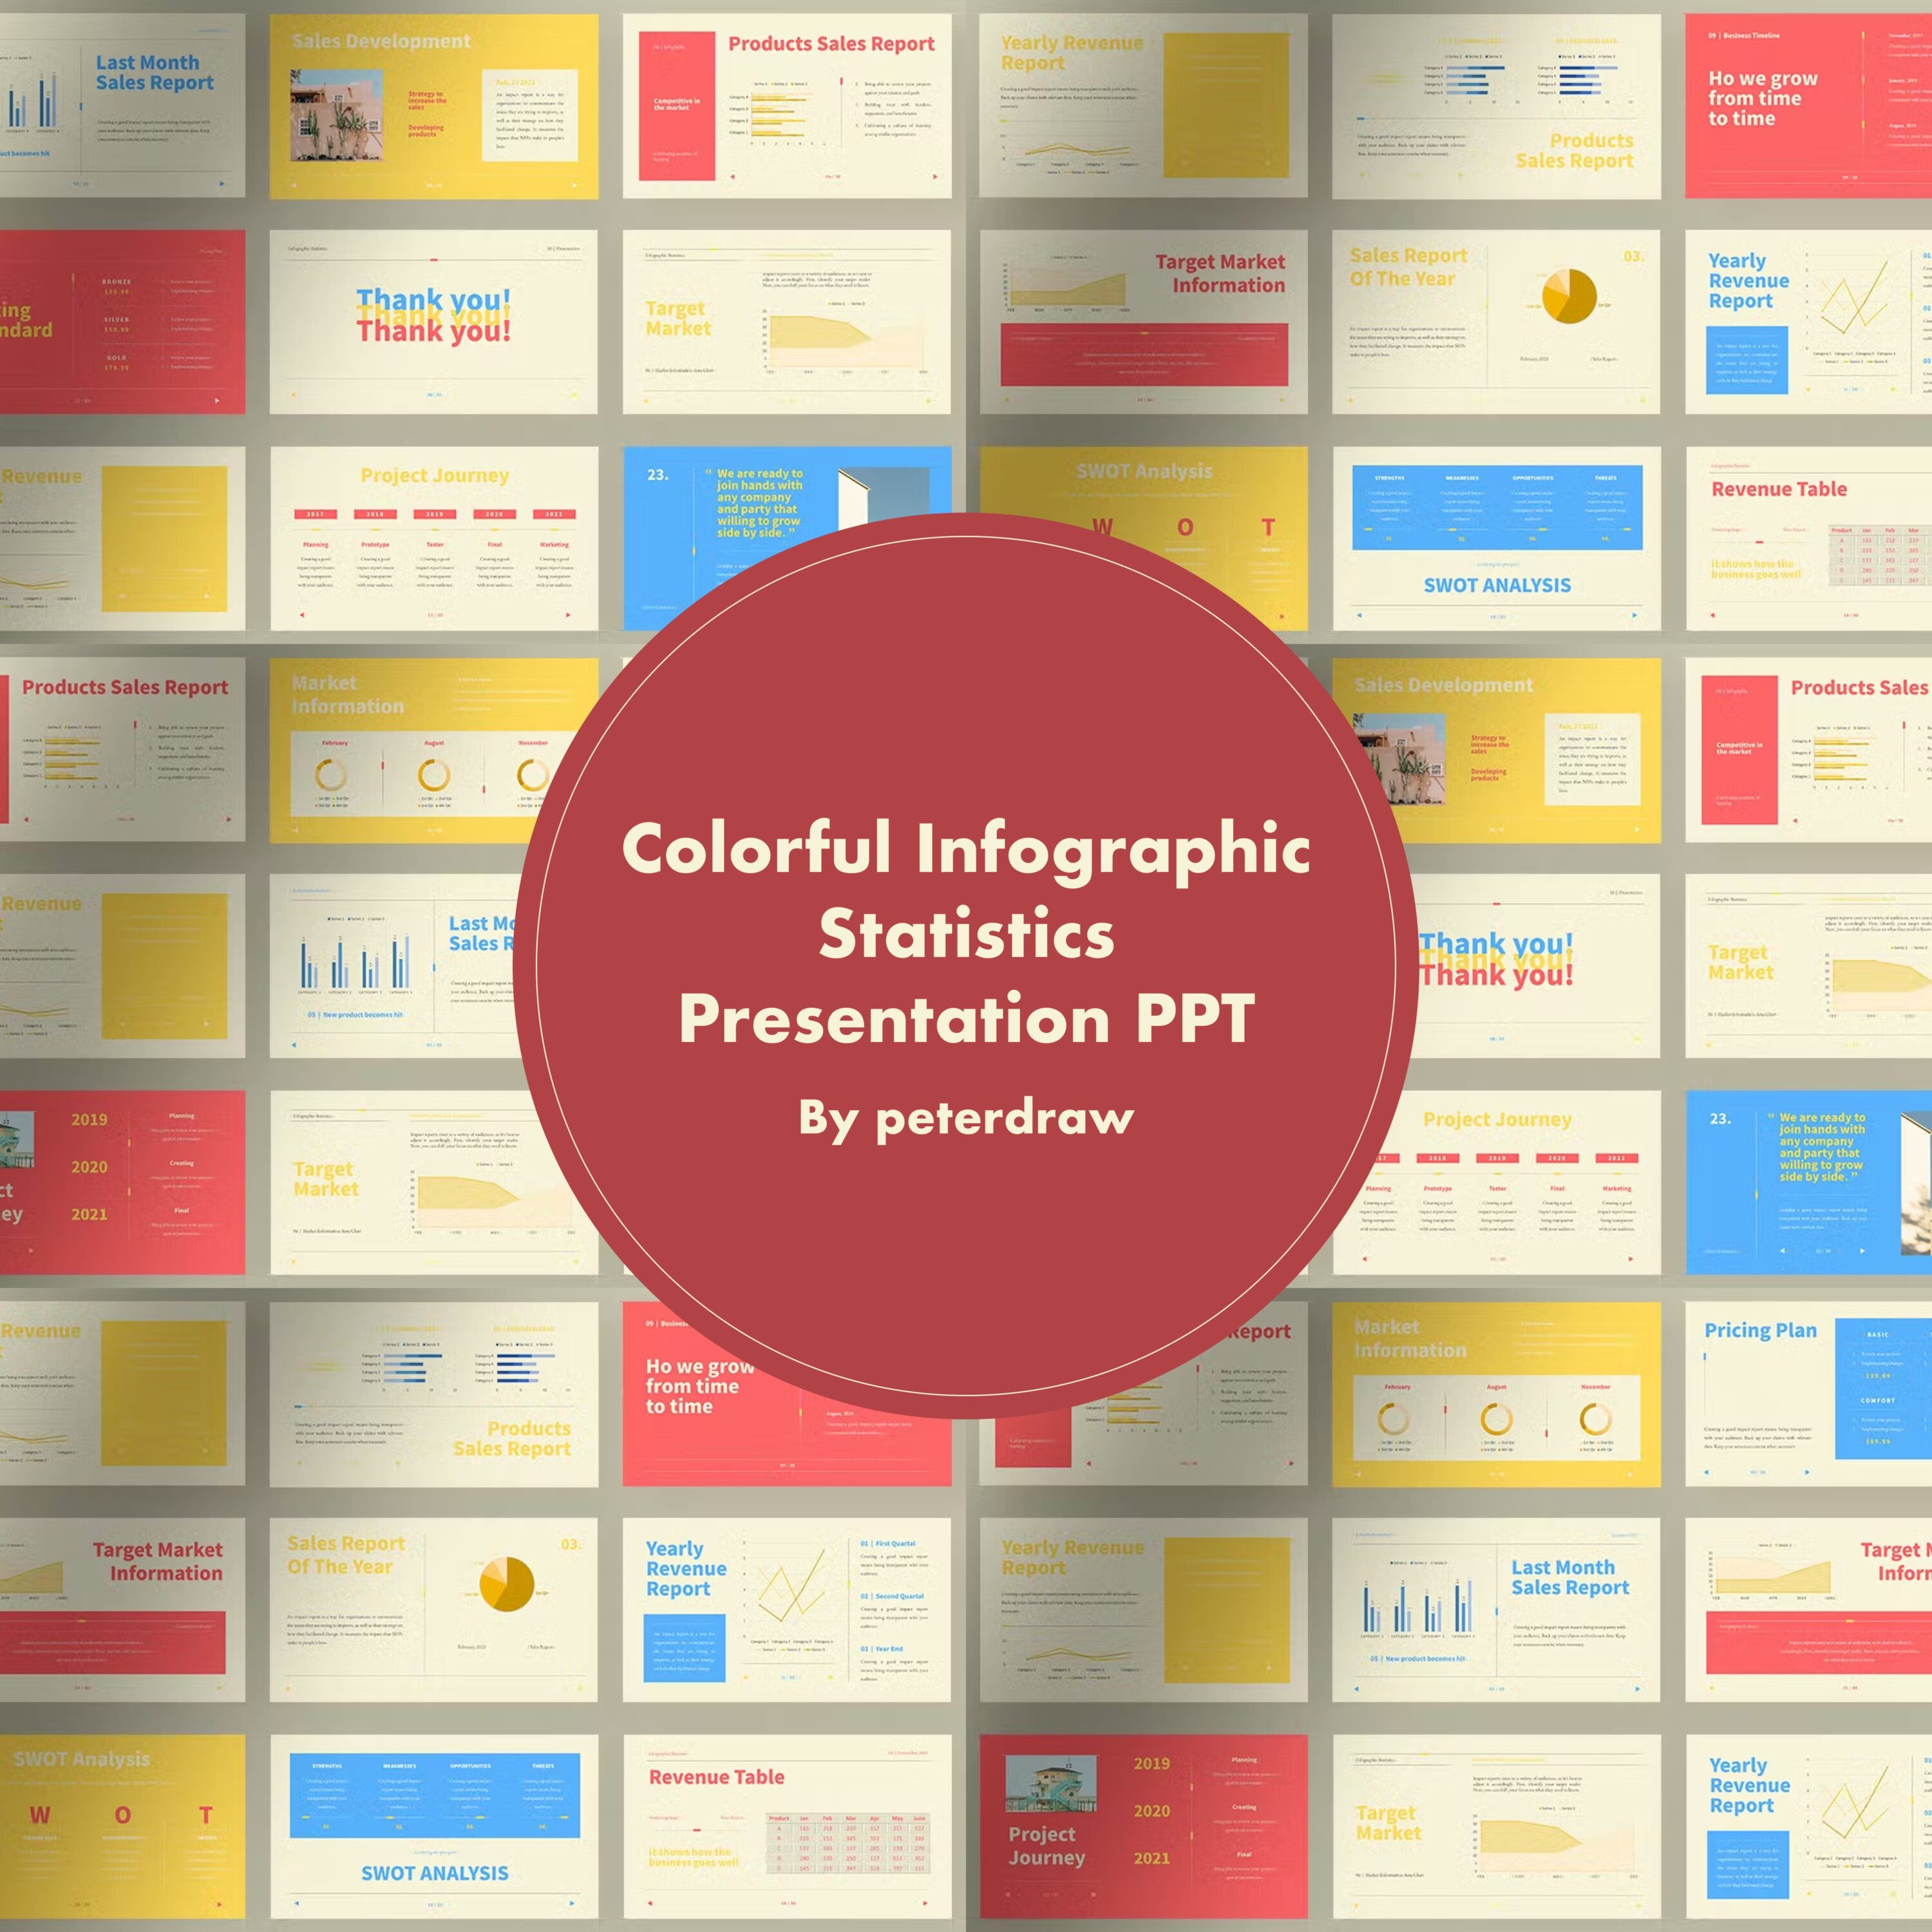 Colorful Infographic Statistics Presentation PPT - main image preview.